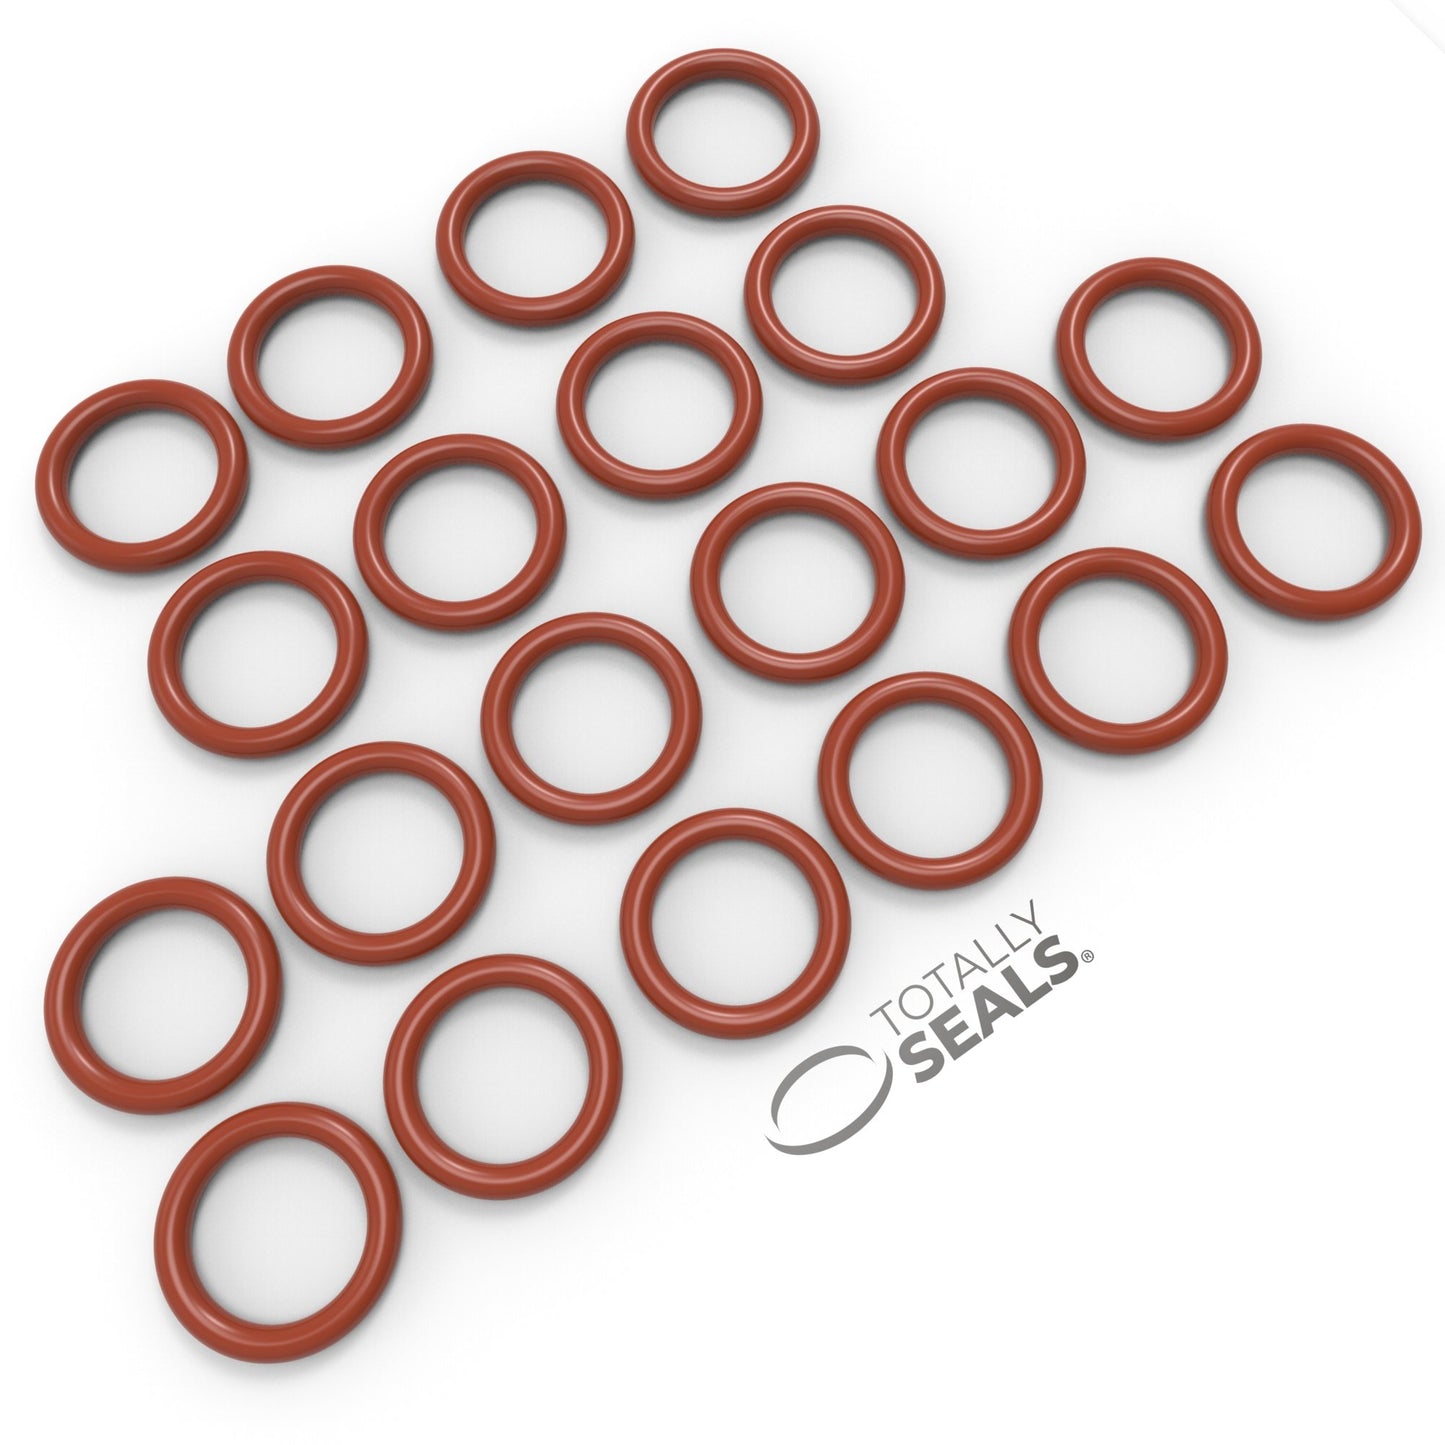 12mm x 2.5mm (17mm OD) Silicone O-Rings - Totally Seals®